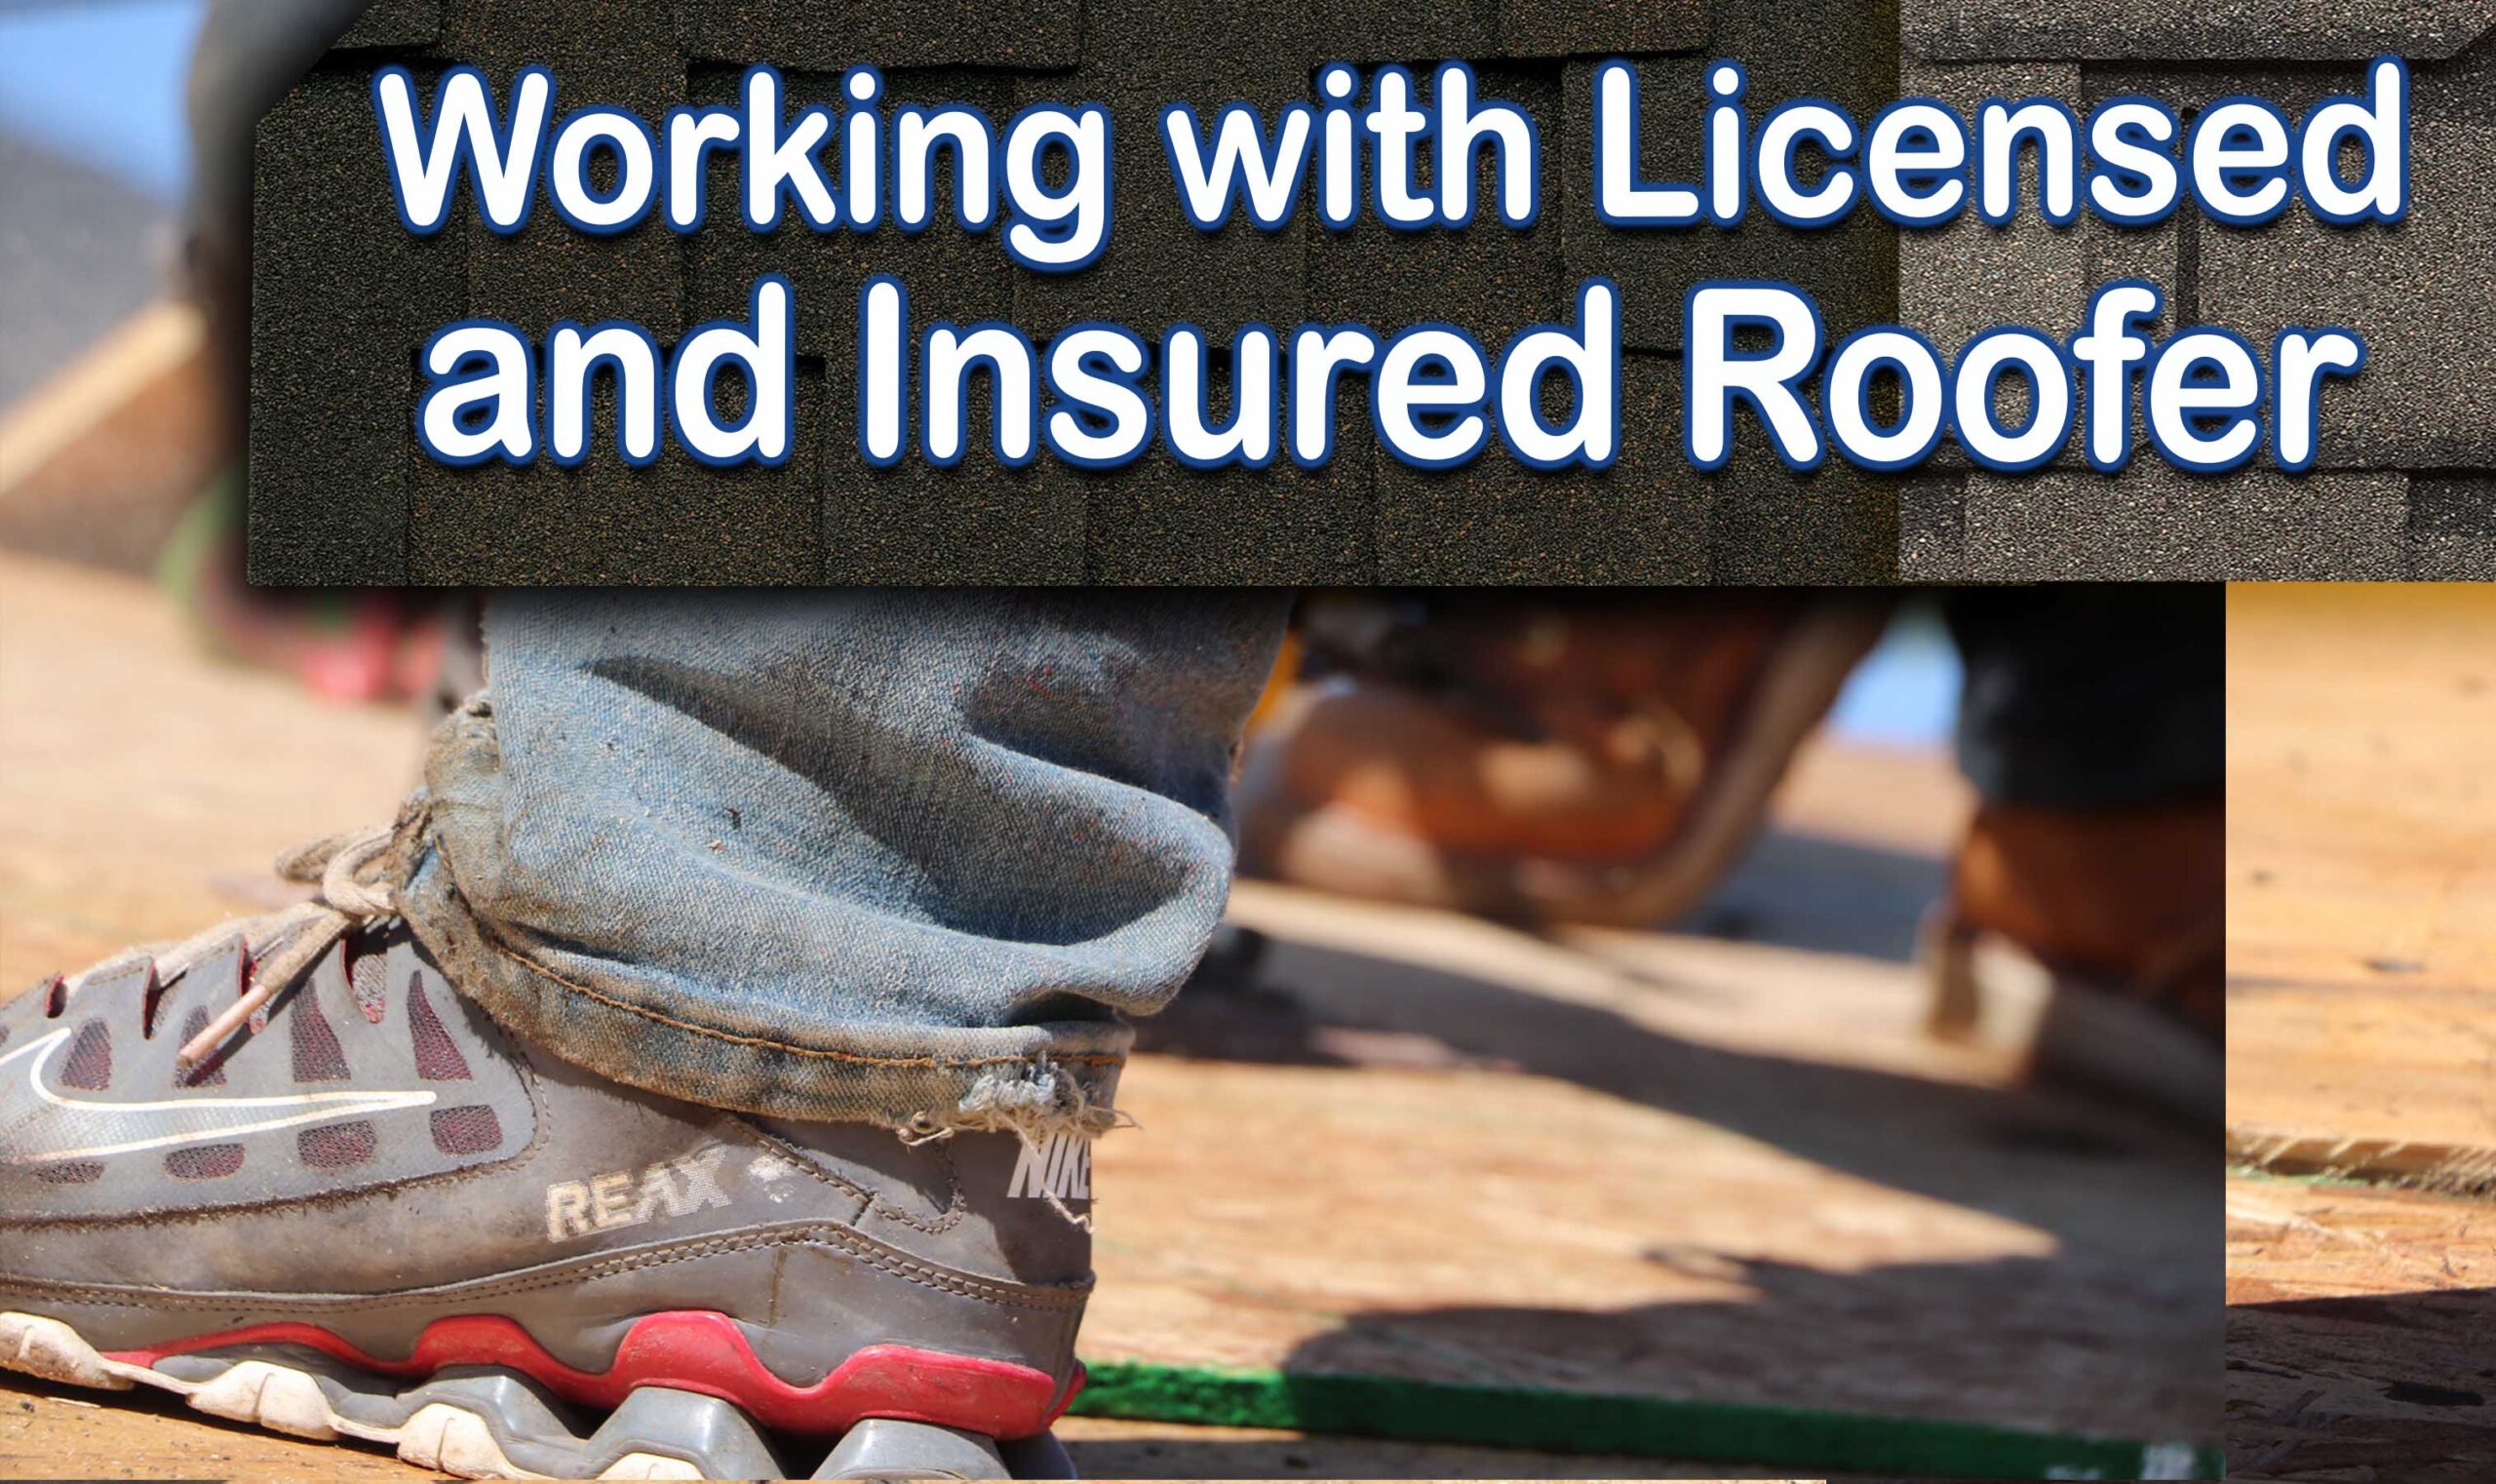 Risks Of Not Working With Licensed And Insured Roofer In Wyandotte